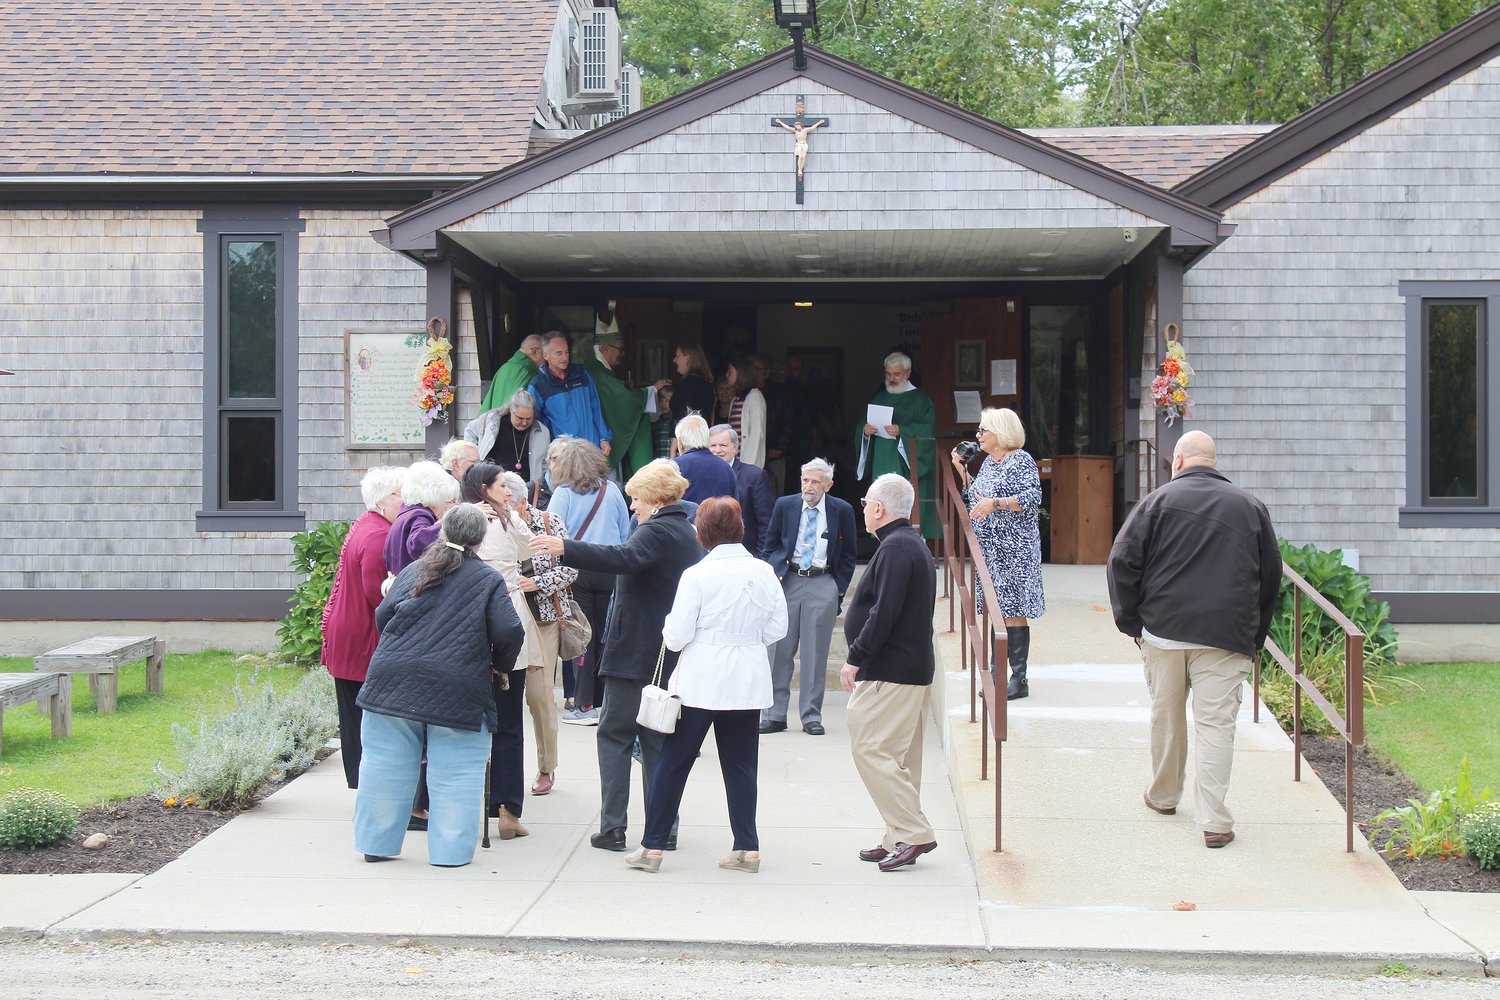 Bishop Thomas J. Tobin presided at St. Paul the Apostle Church in Foster as the parish community celebrated their 50th anniversary on Sunday, Oct. 2, with a Mass of Thanksgiving.